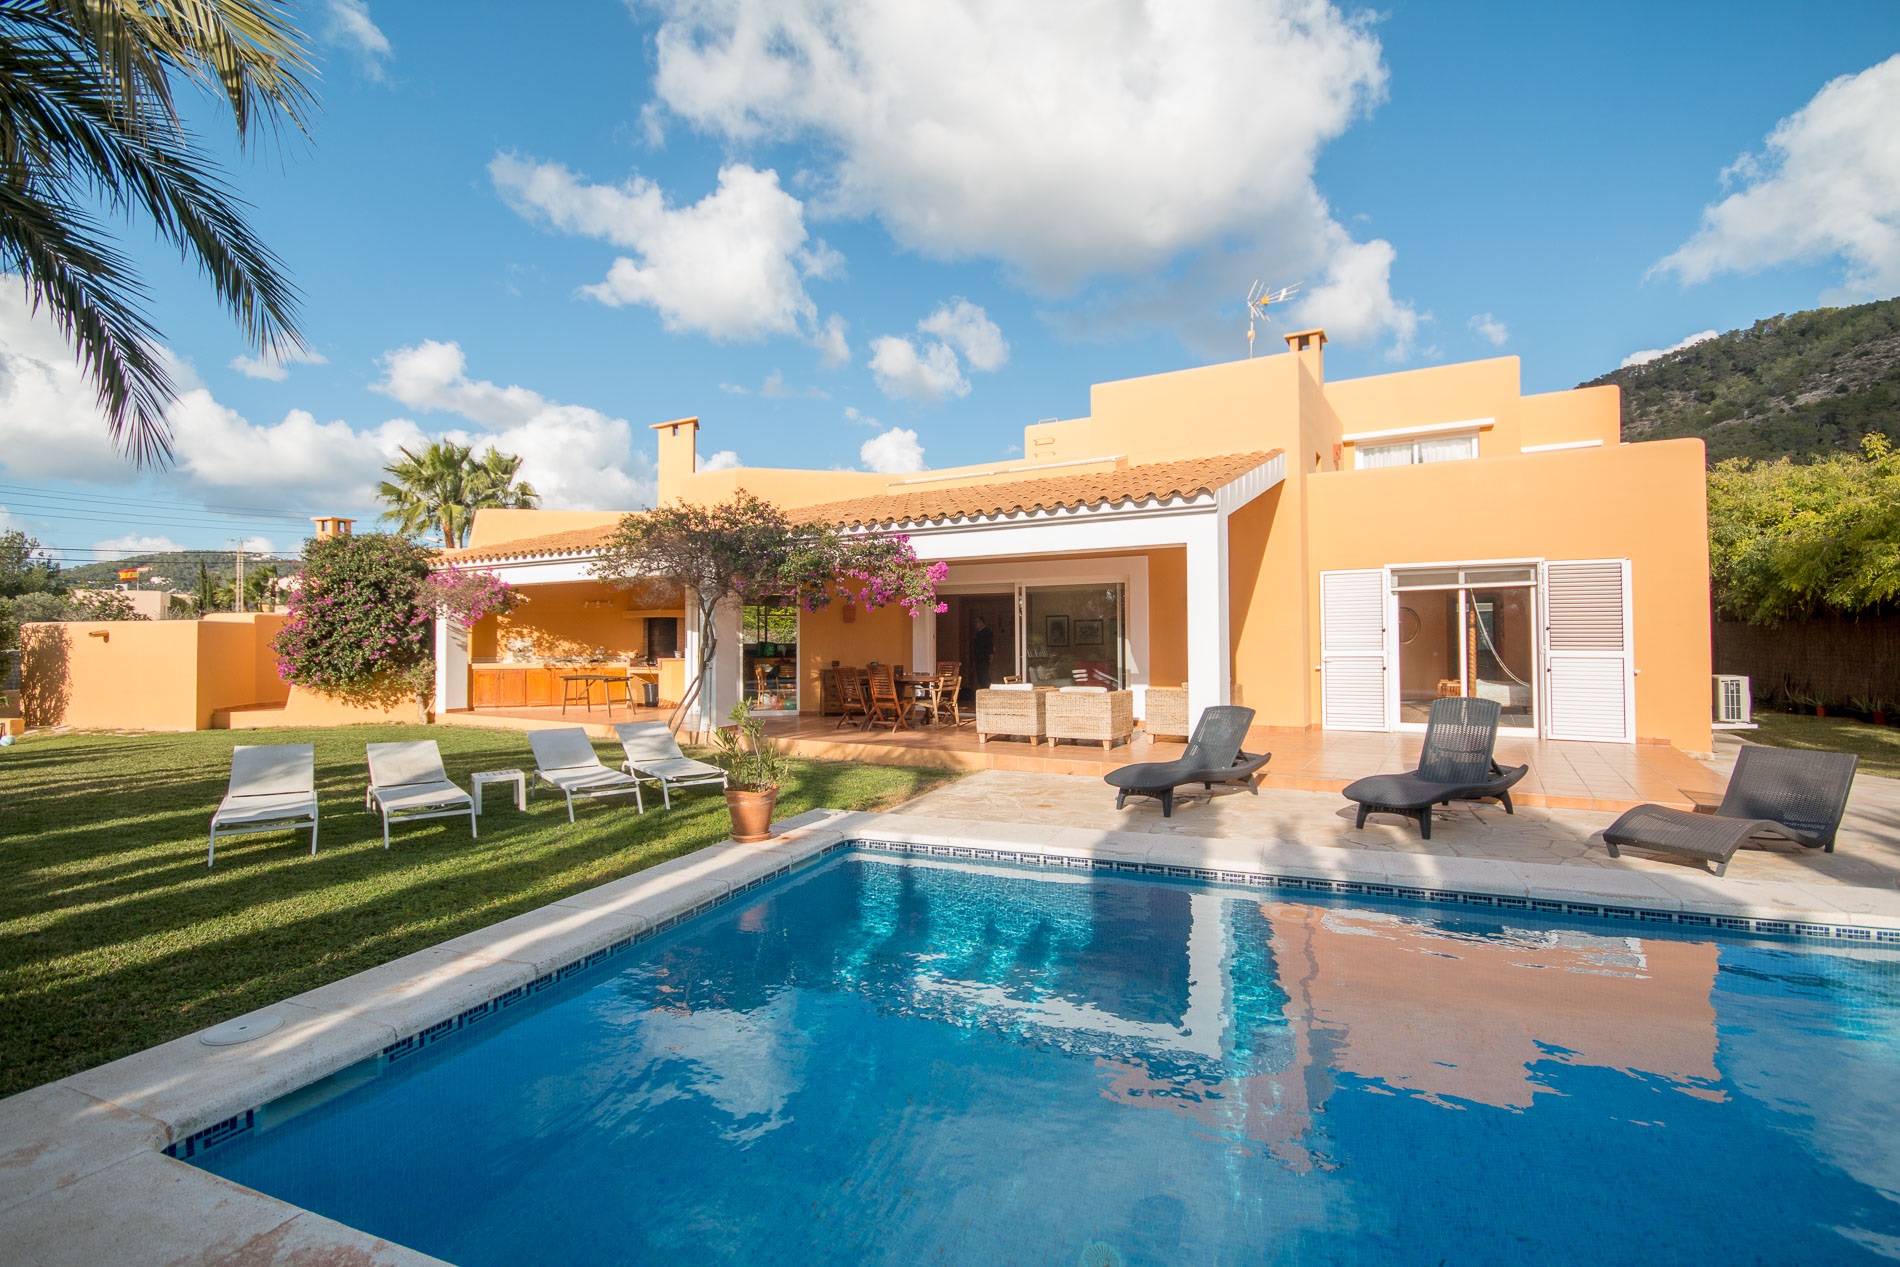 Charming villa in the most popular area of Ibiza